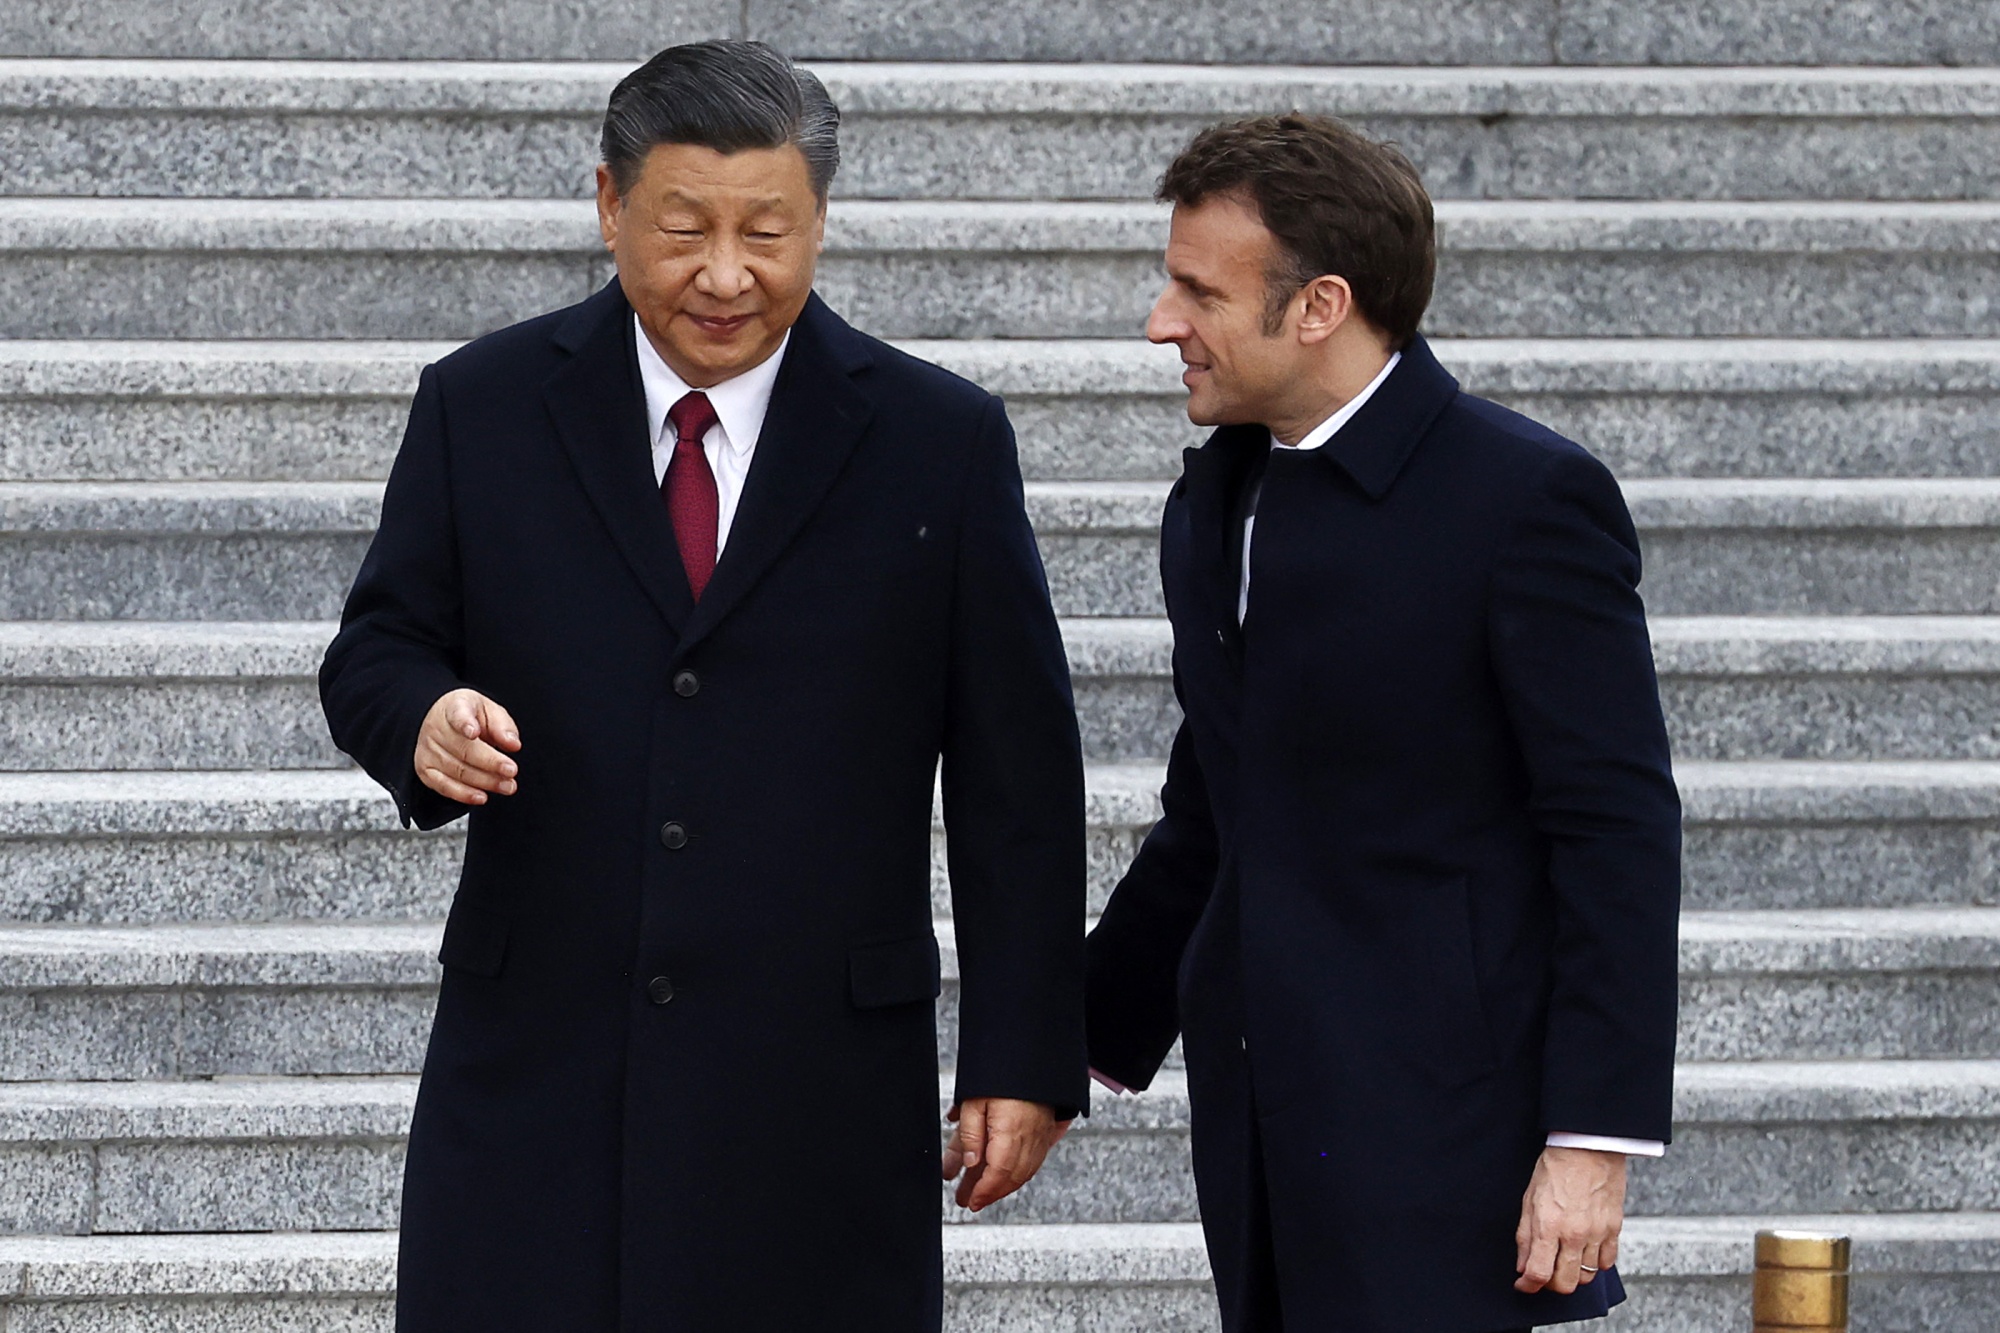 French President Macron Wants China's Help to Bring Russia